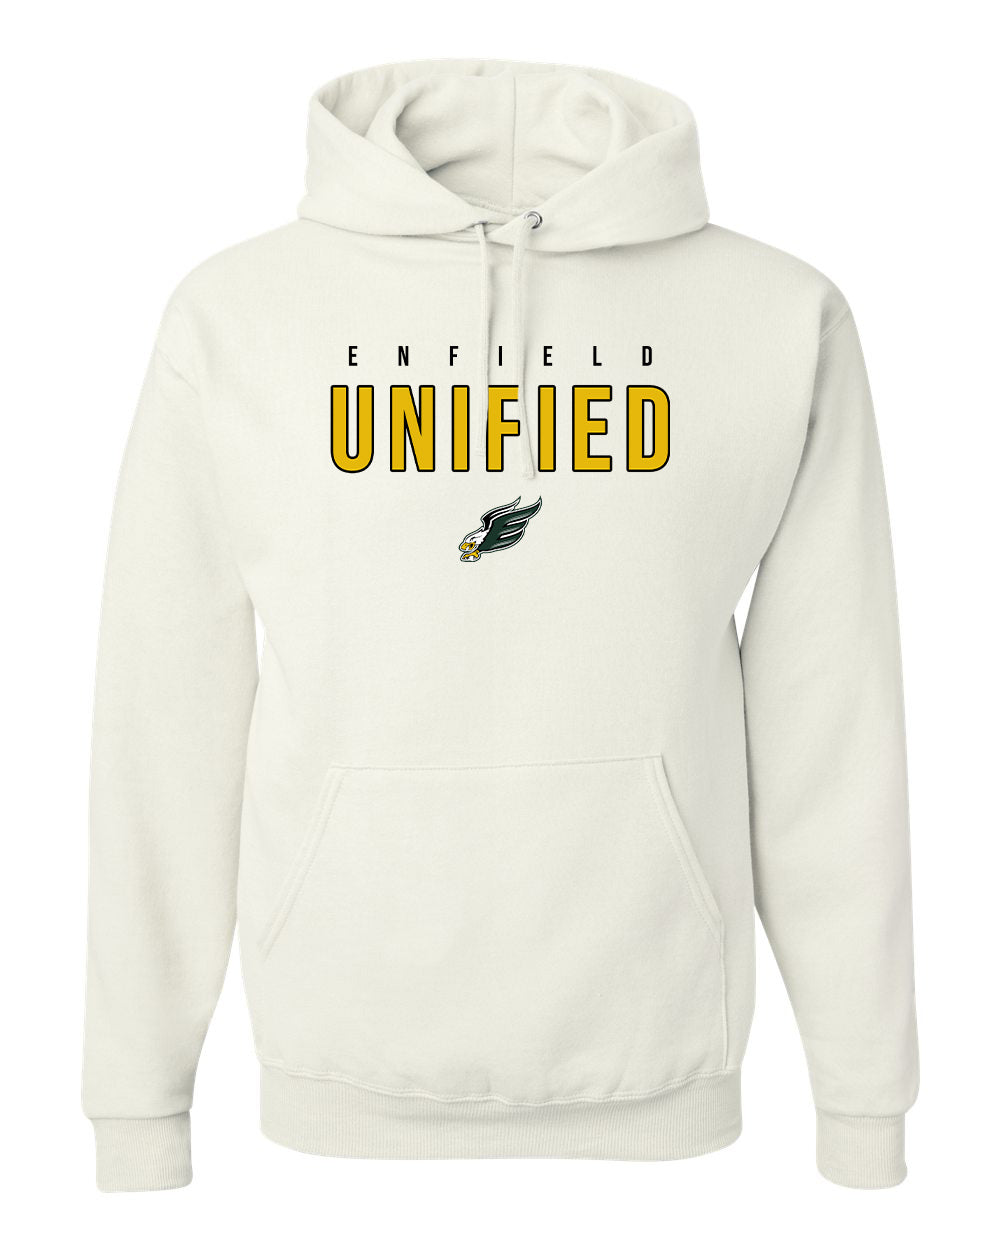 Unified Hoodie - 996MR (color options available)